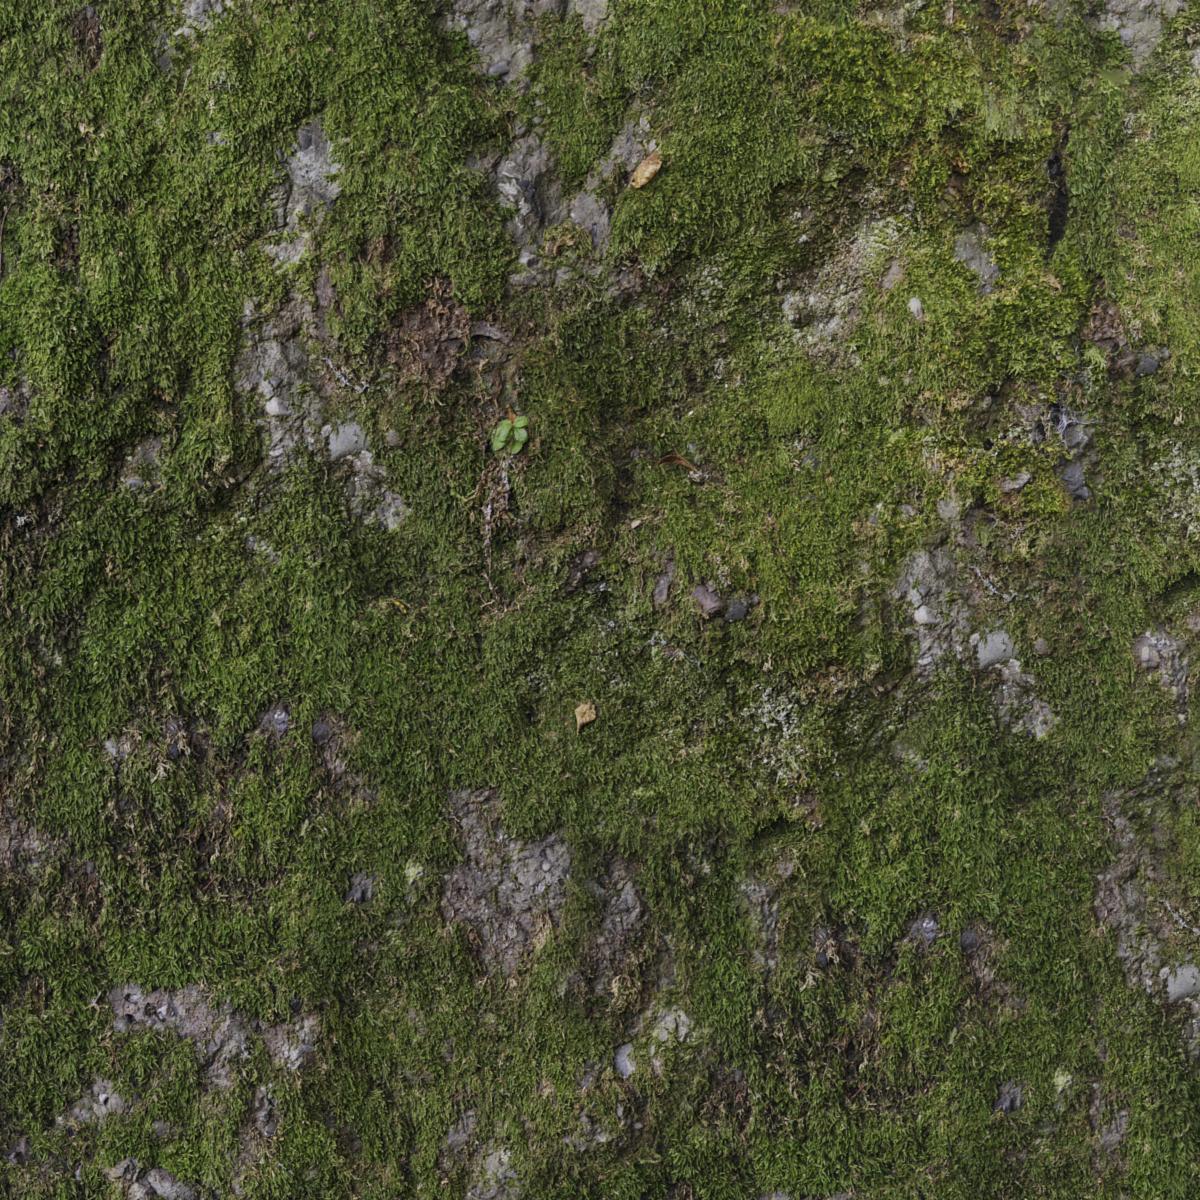 ROCK-WITH-MOSS